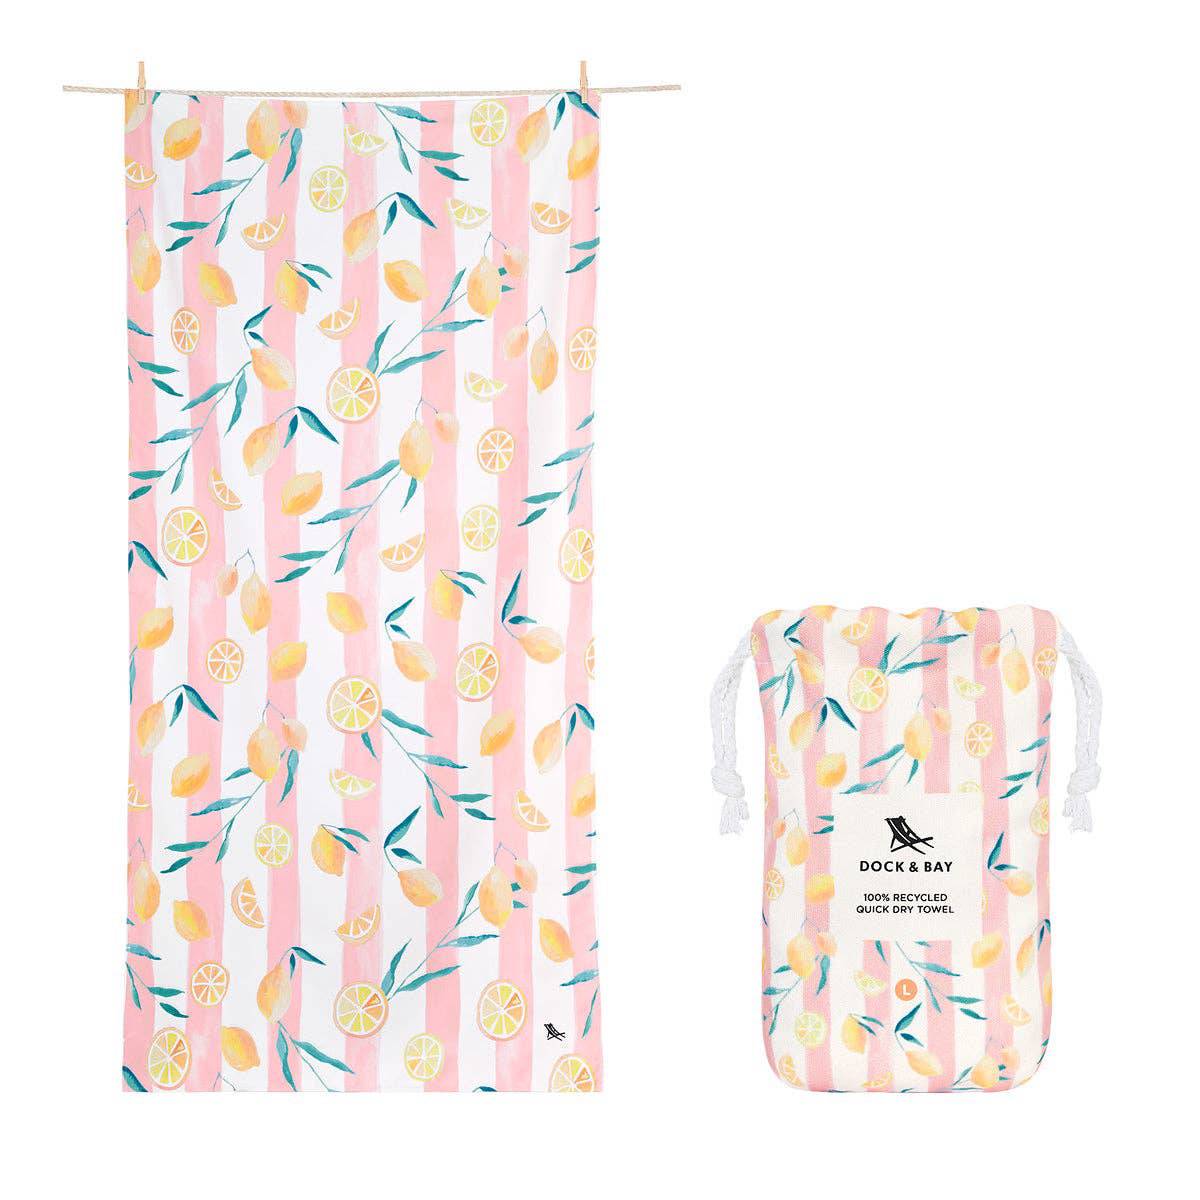 Dock & Bay Quick Dry Towels - Life Gives You Lemons - 2 sizes - The Preppy Bunny